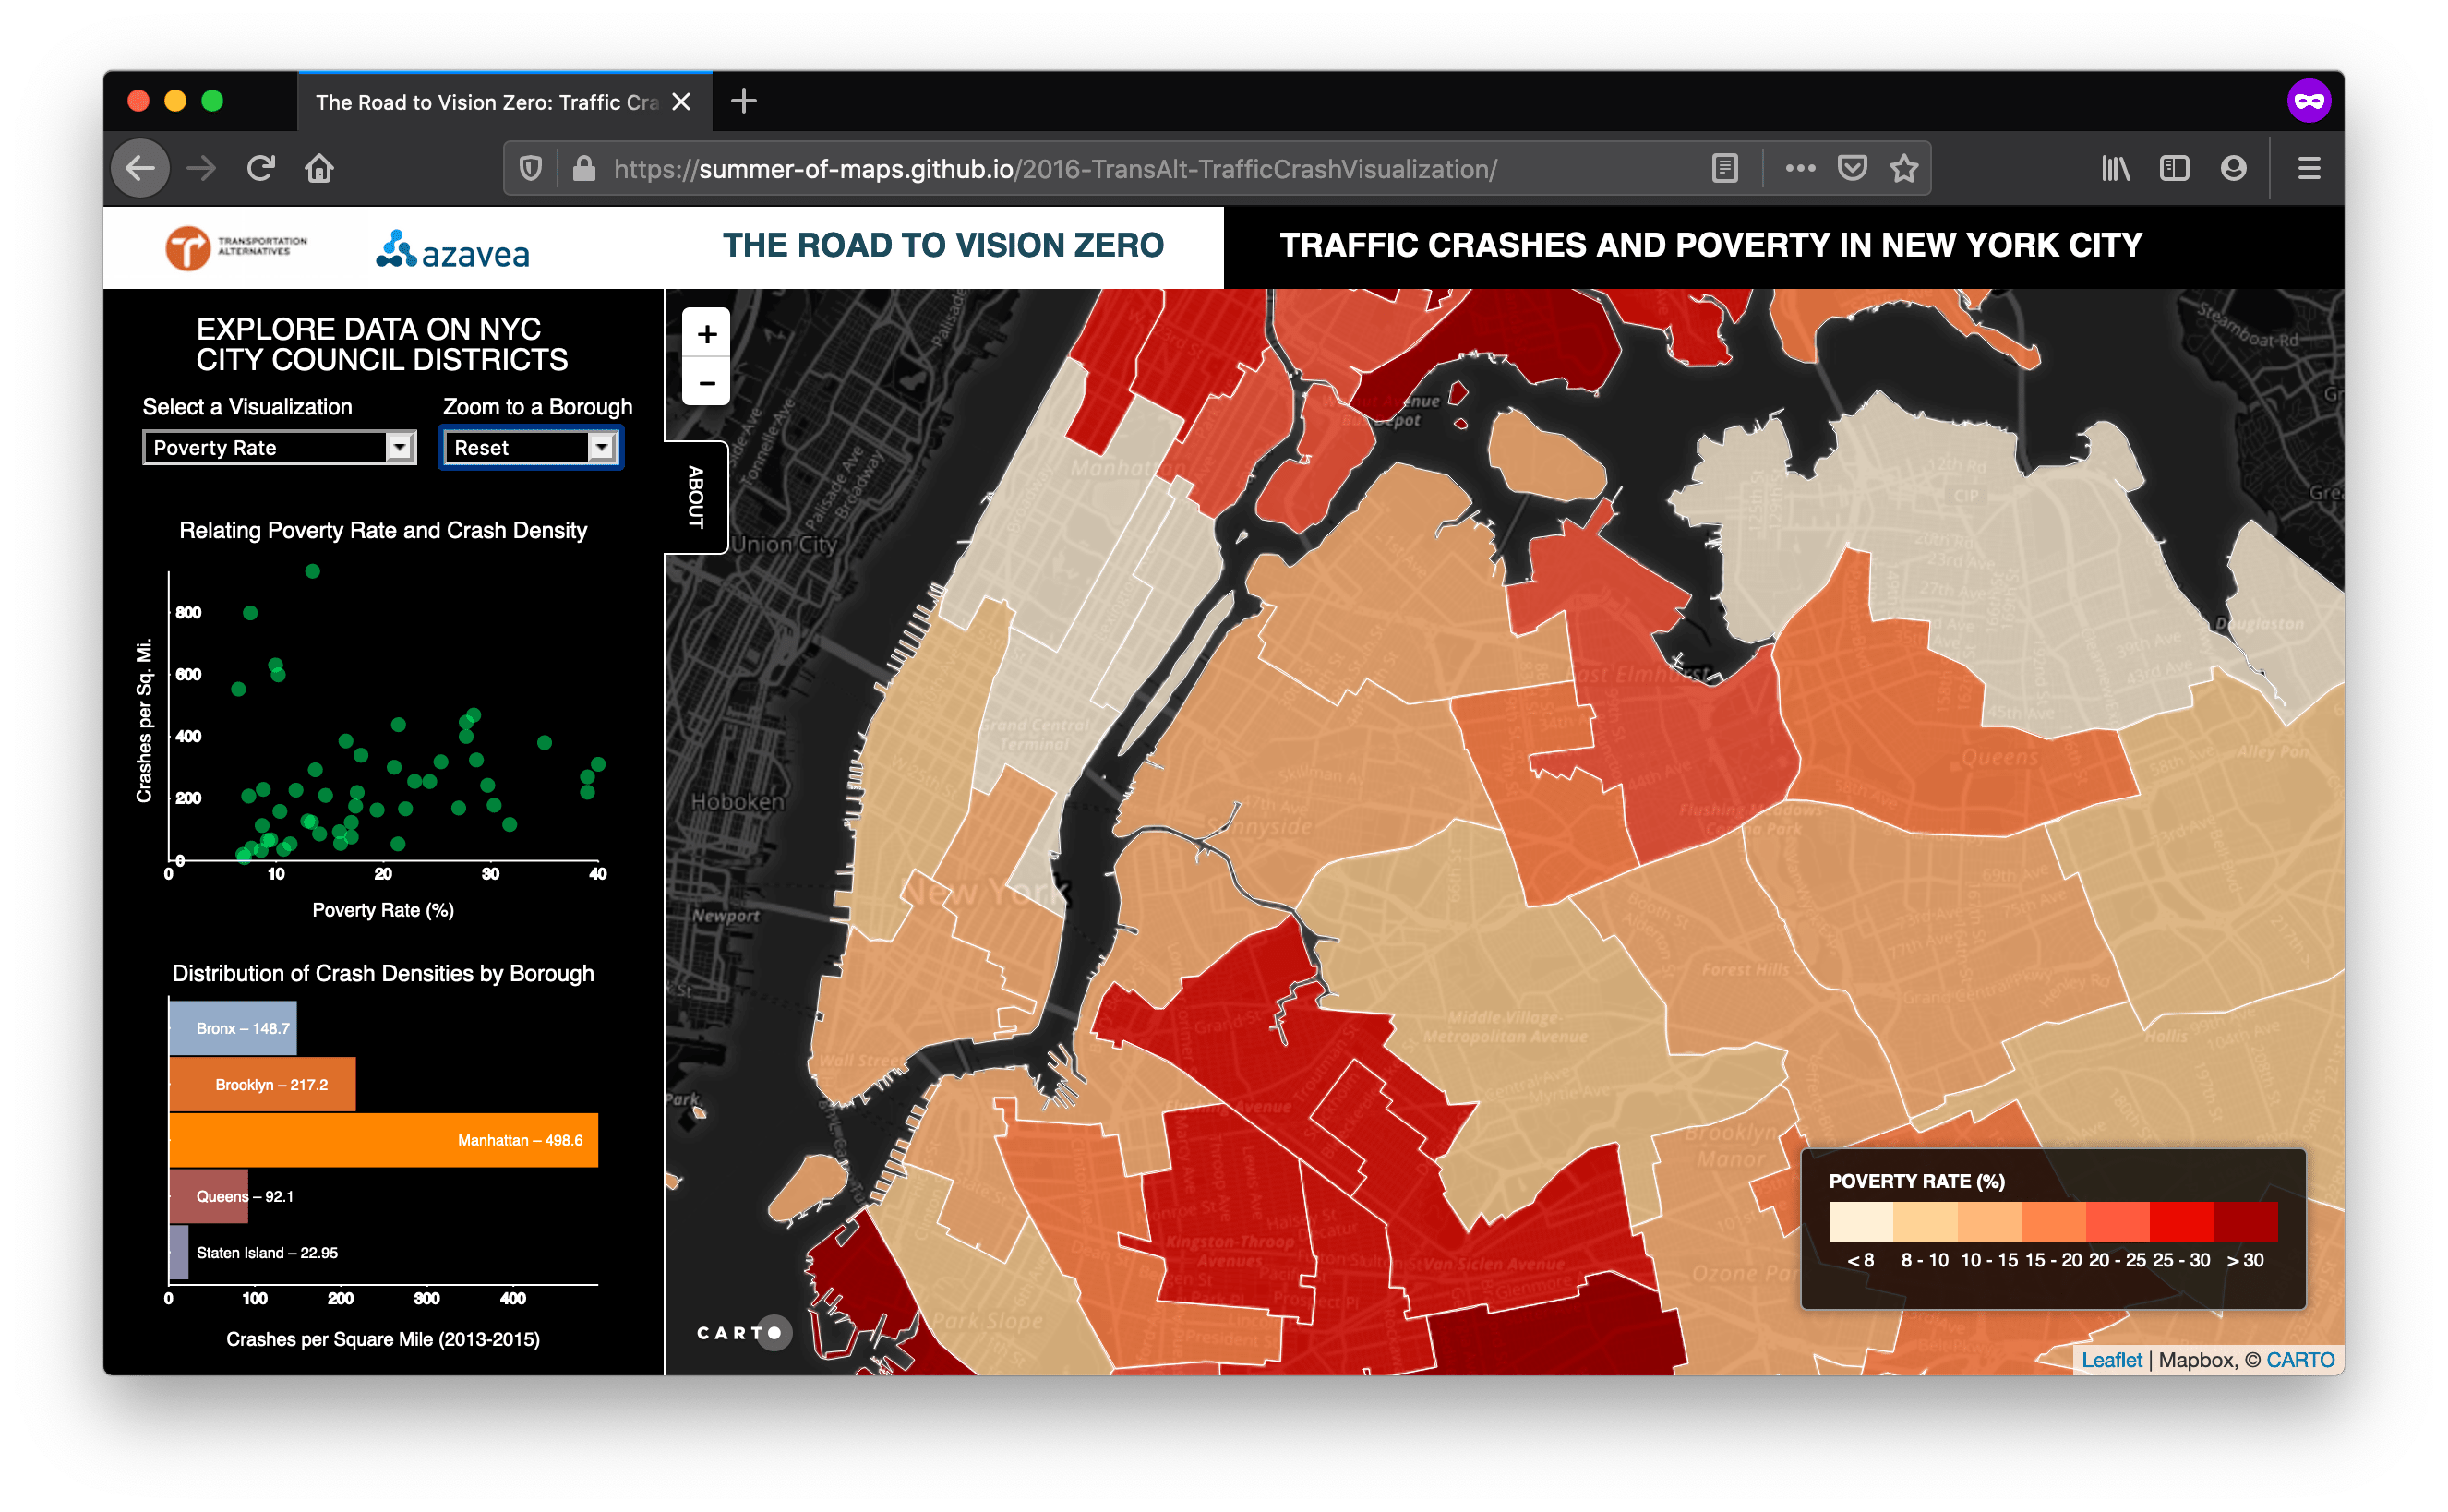 Notice that we have the Poverty Rate layer selected in the dropdown, the Poverty Rate layer is showing on the map, and the scatterplot is showing the relationship between Poverty Rate and Crash Density. Ah, the beauty of integrated data views.